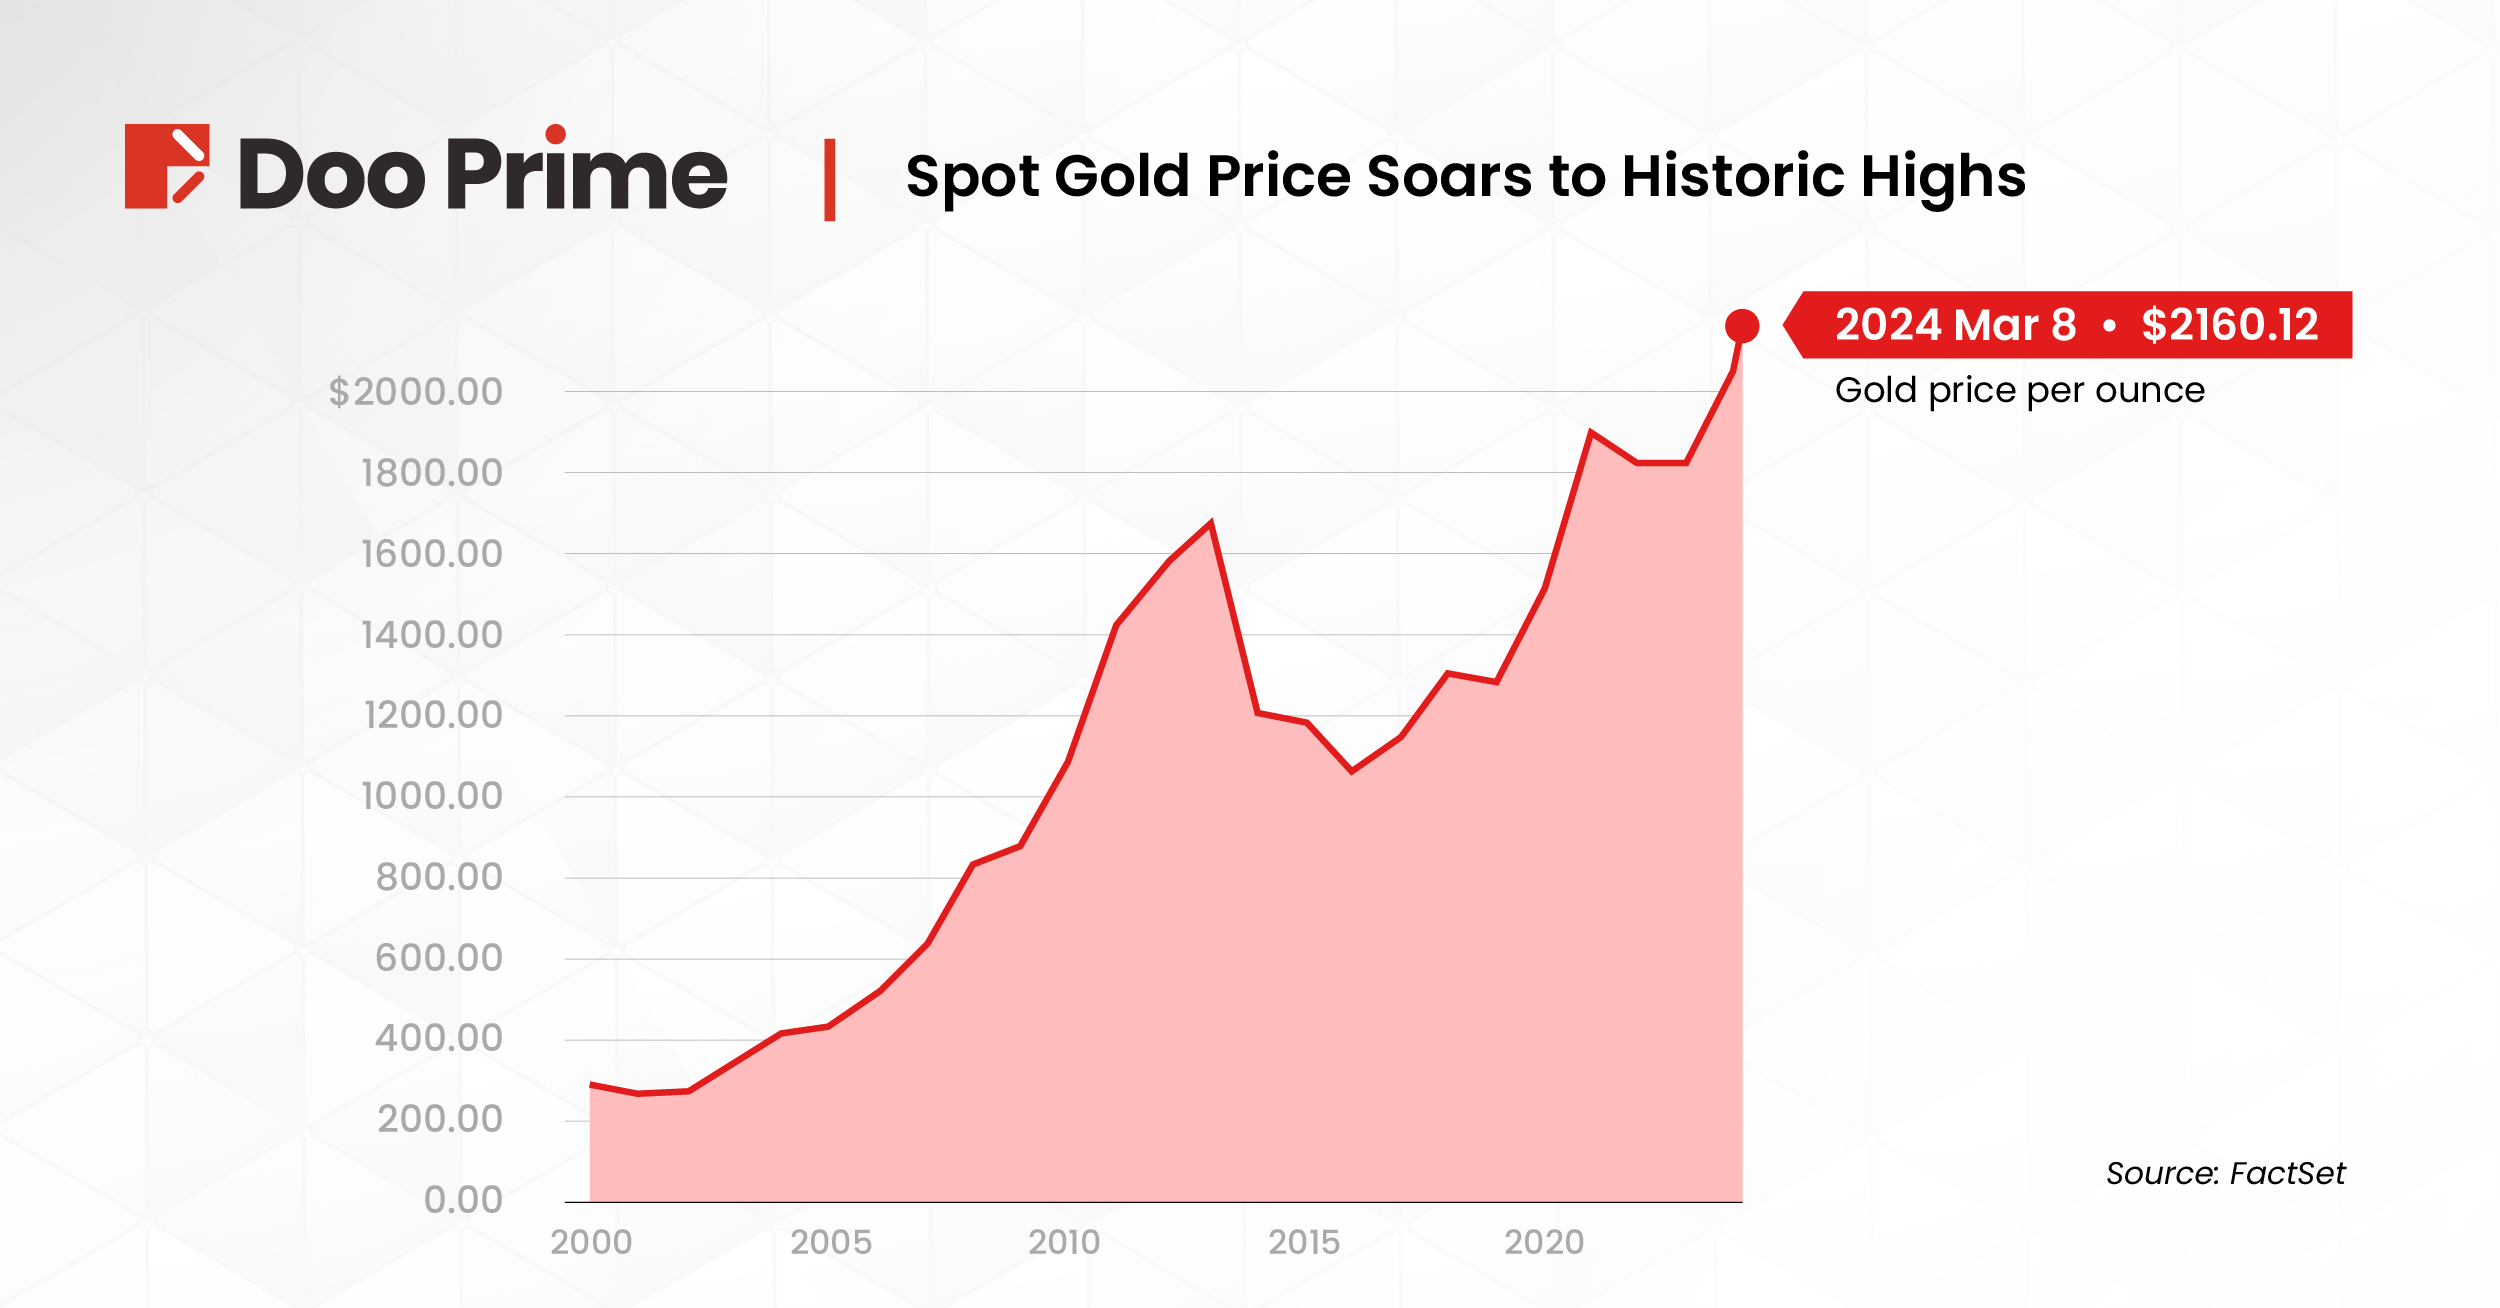 Spot Gold Price Soars to Historic Highs